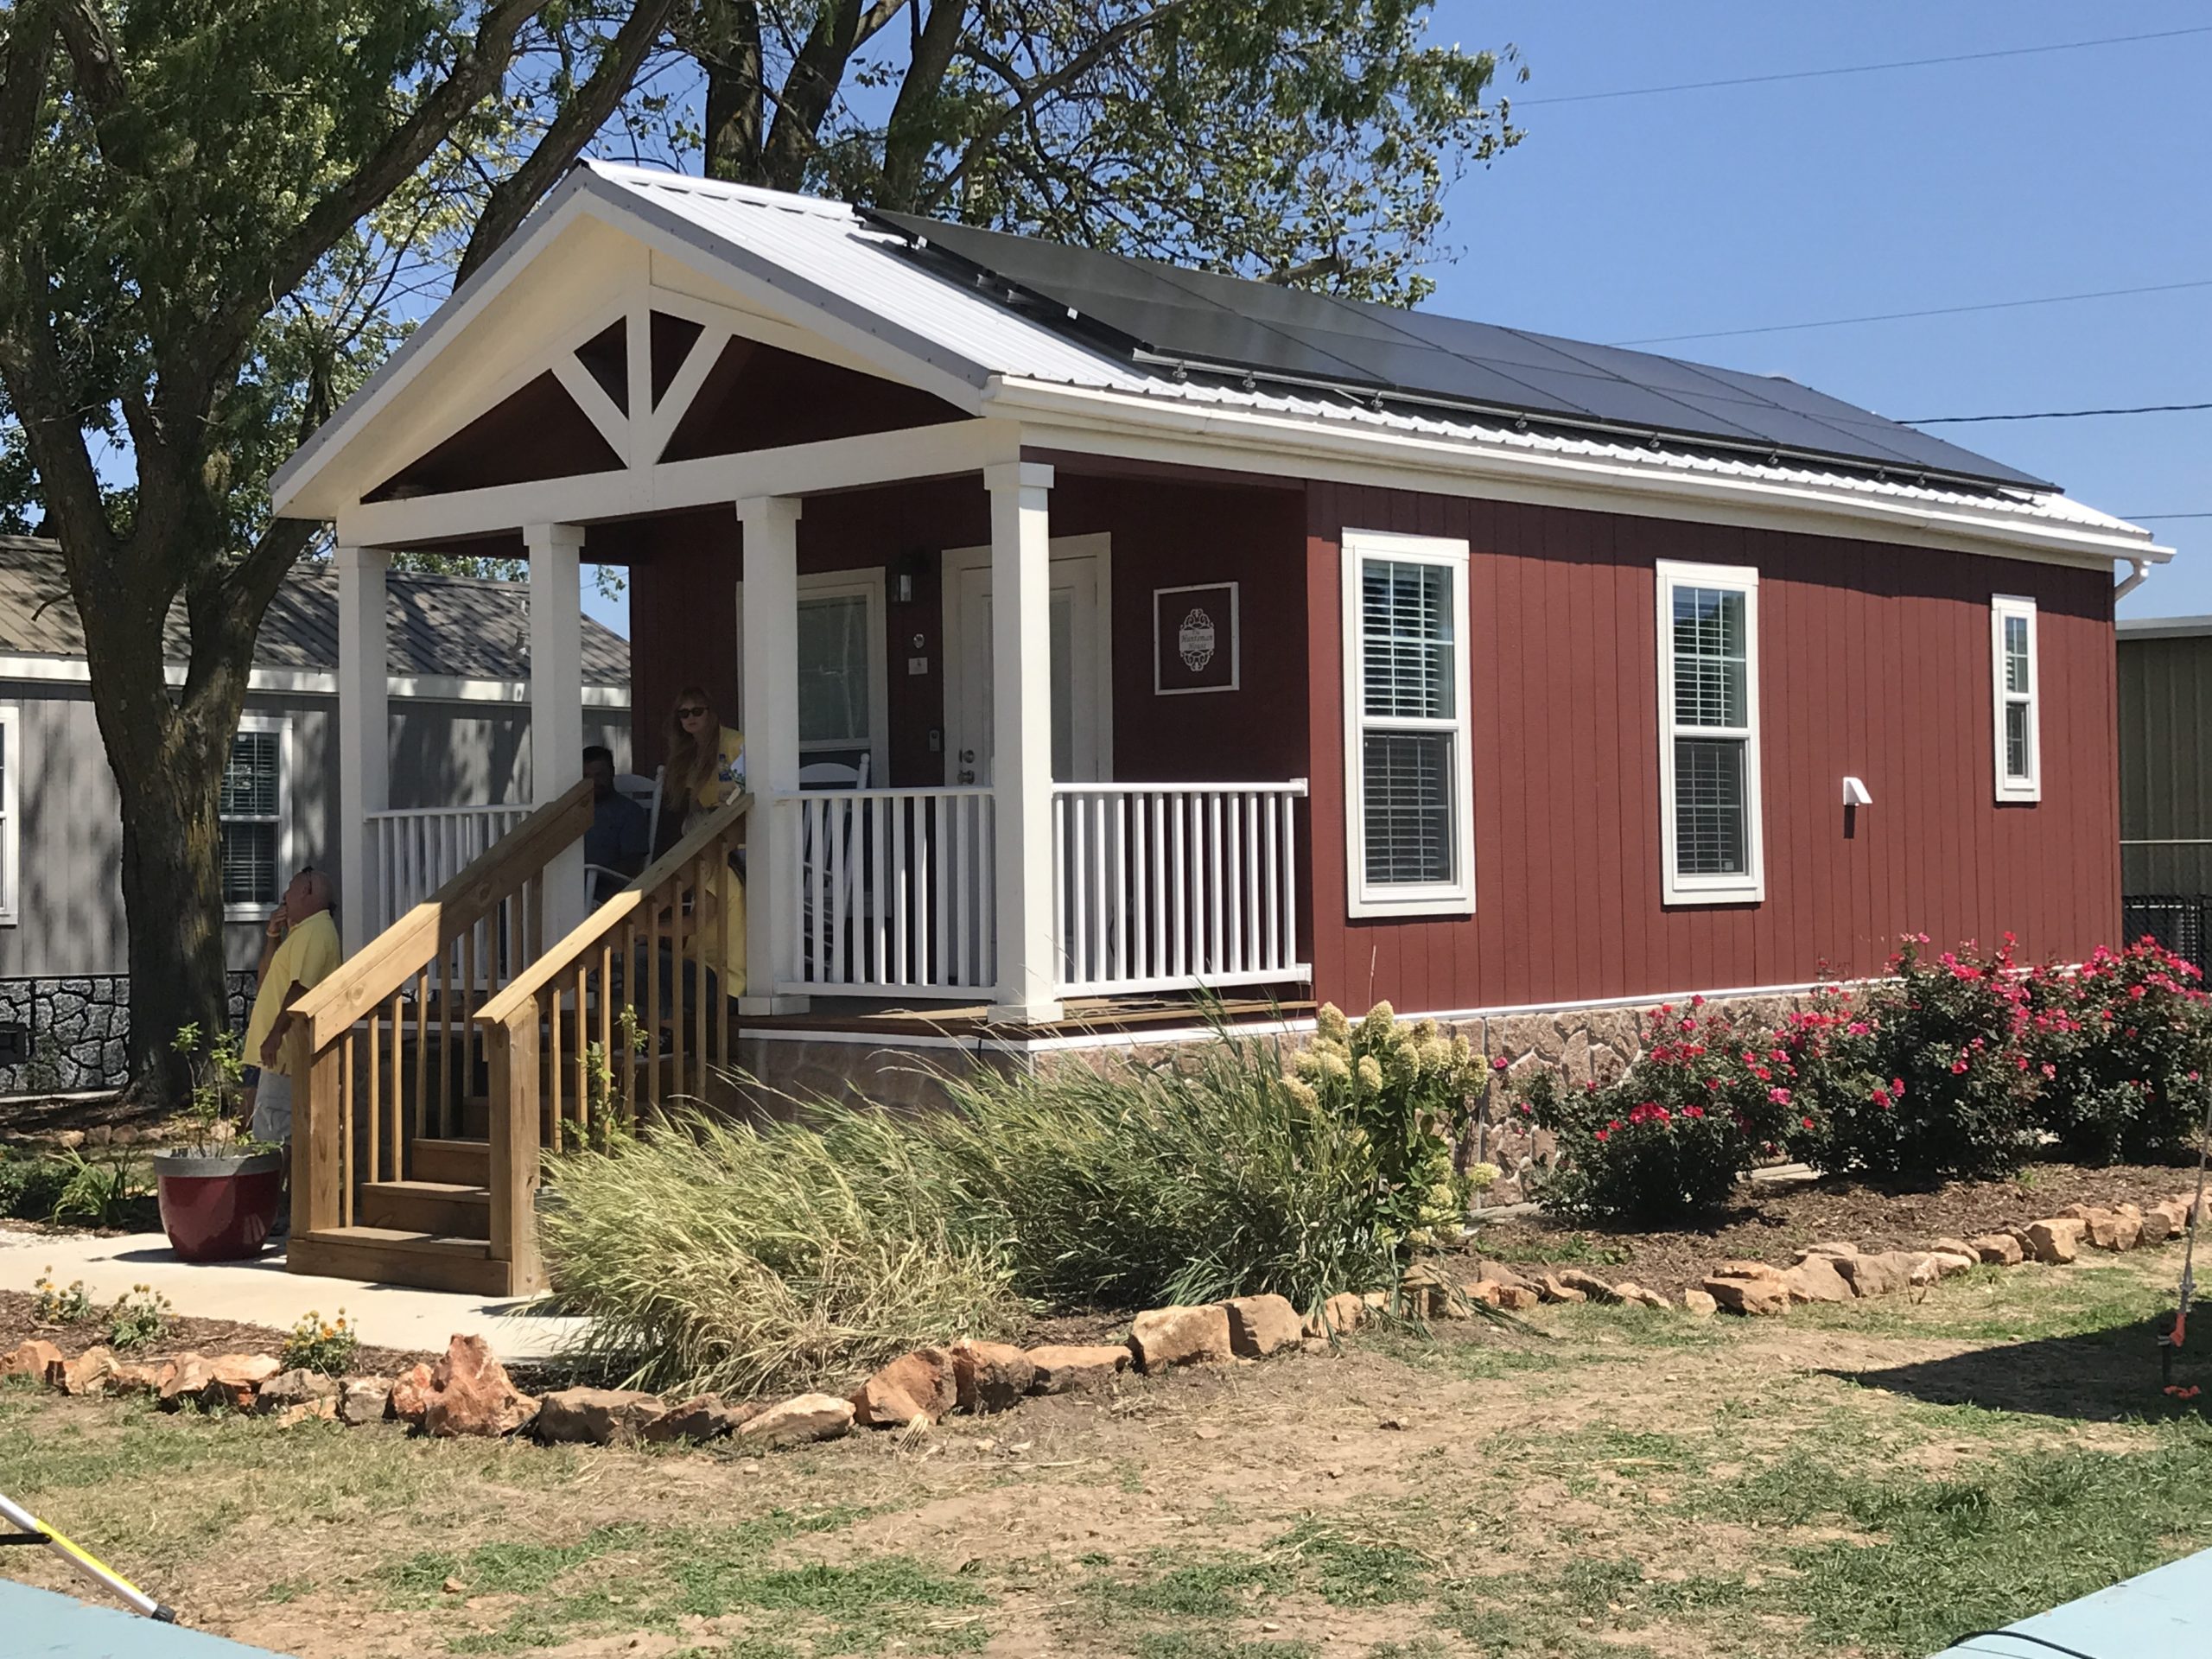 A small, red house at Eden Village in Springfield, MO with white trim and solar panels mounted to its aluminum roof.